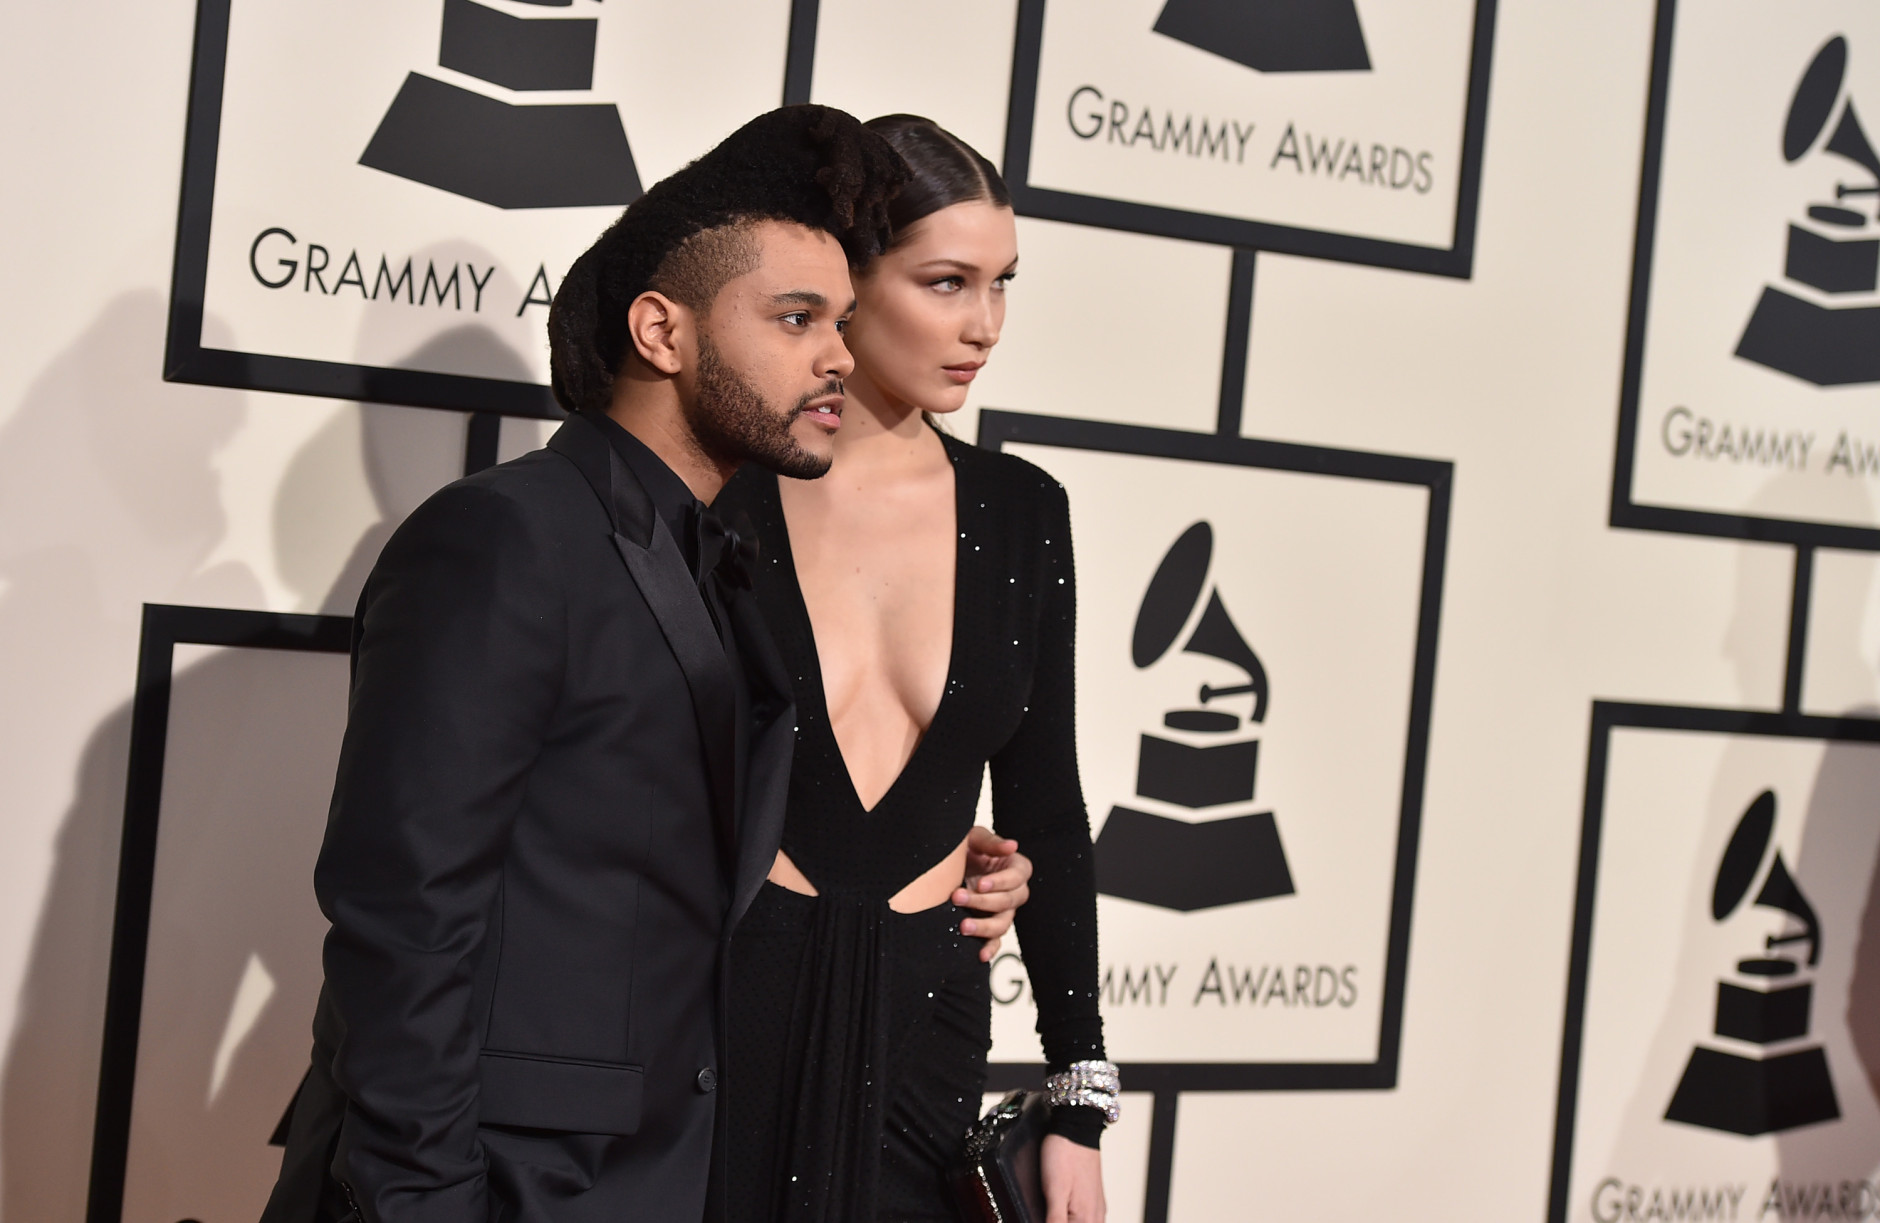 The Weeknd, left, and Bella Hadid arrive at the 58th annual Grammy Awards at the Staples Center on Monday, Feb. 15, 2016, in Los Angeles. (Photo by Jordan Strauss/Invision/AP)